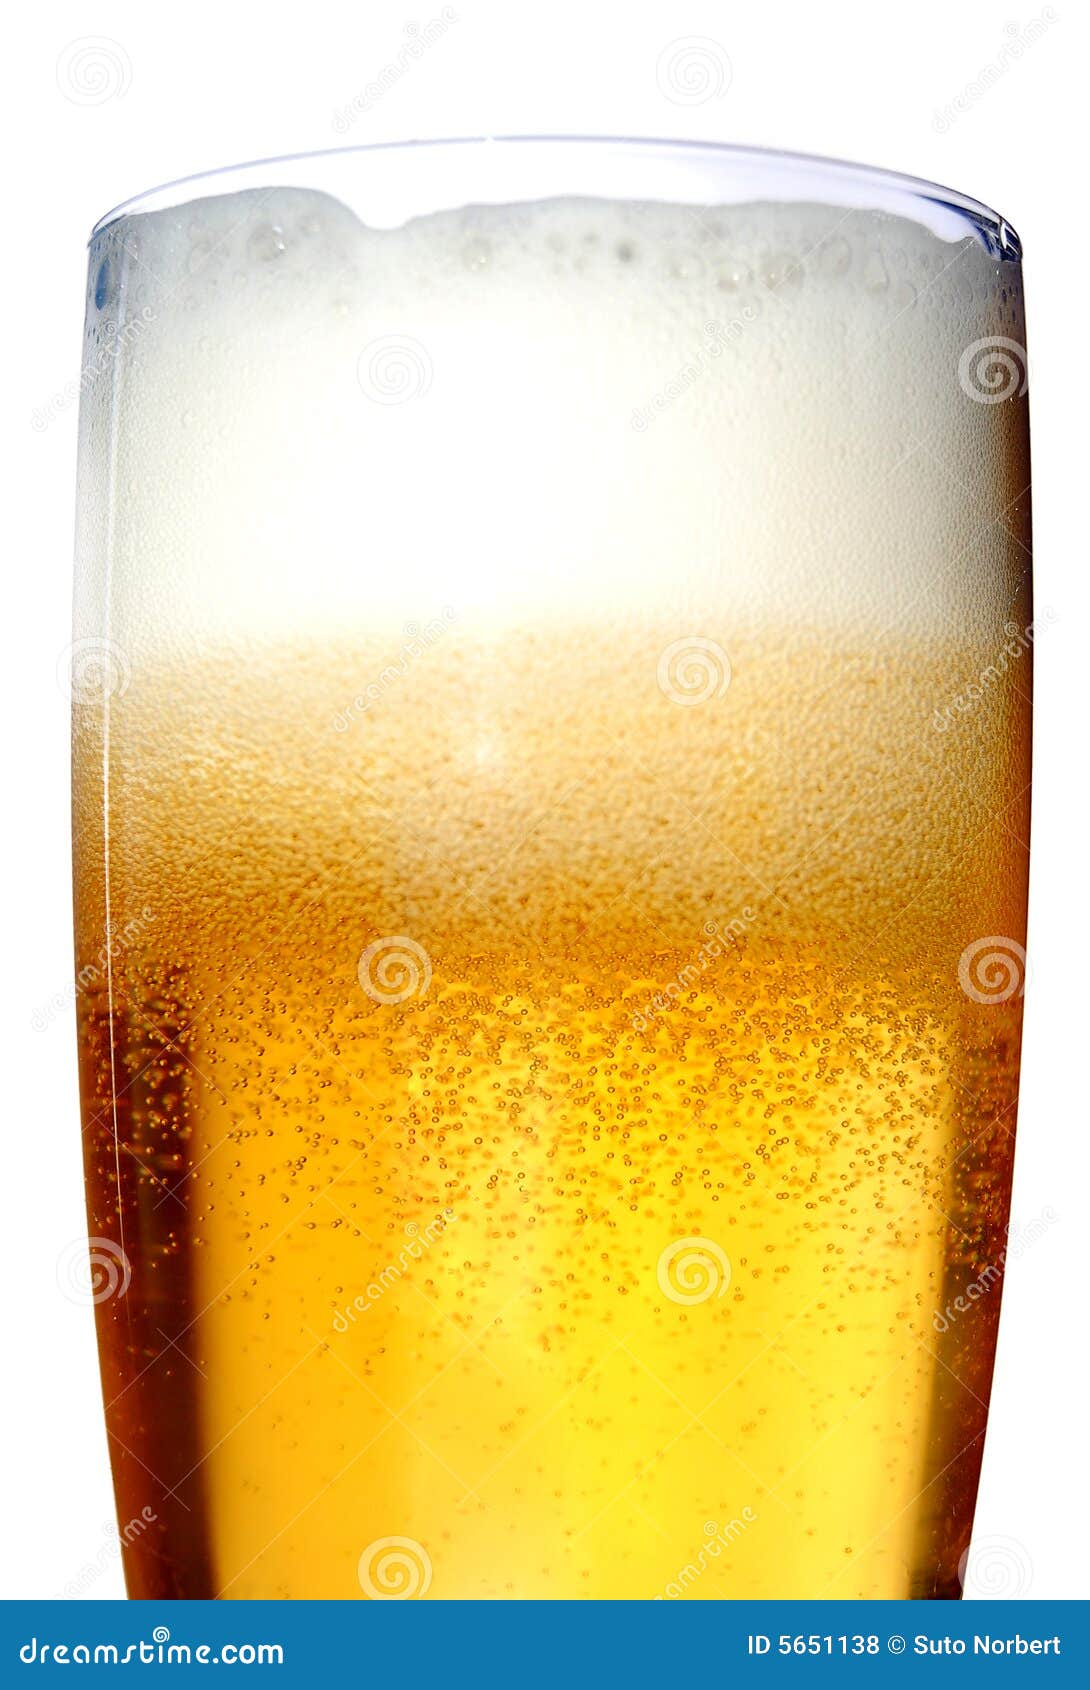 glass of beer close-up with froth